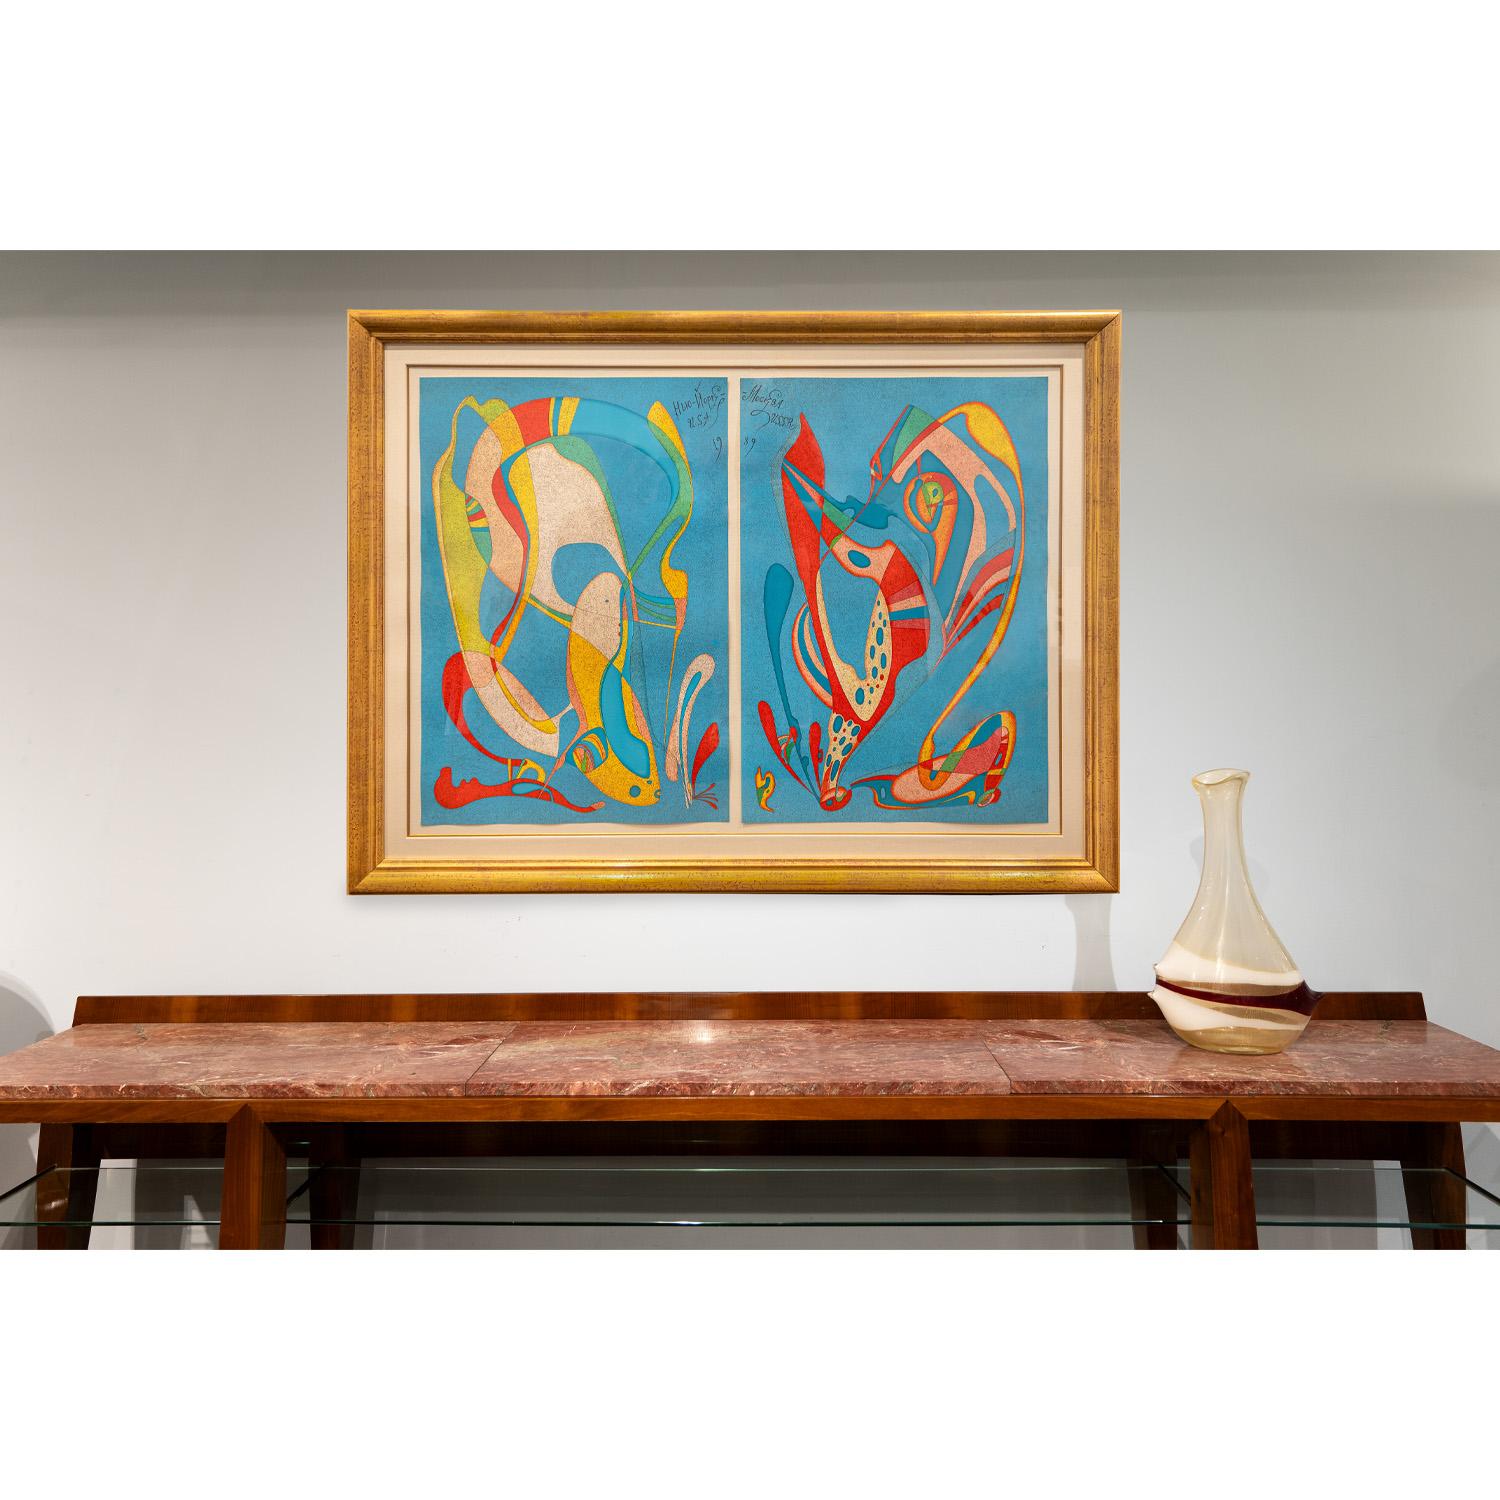 M. Chemiakin Large Abstract Pair of Lithographs 1989 (Signed and Numbered) For Sale 1